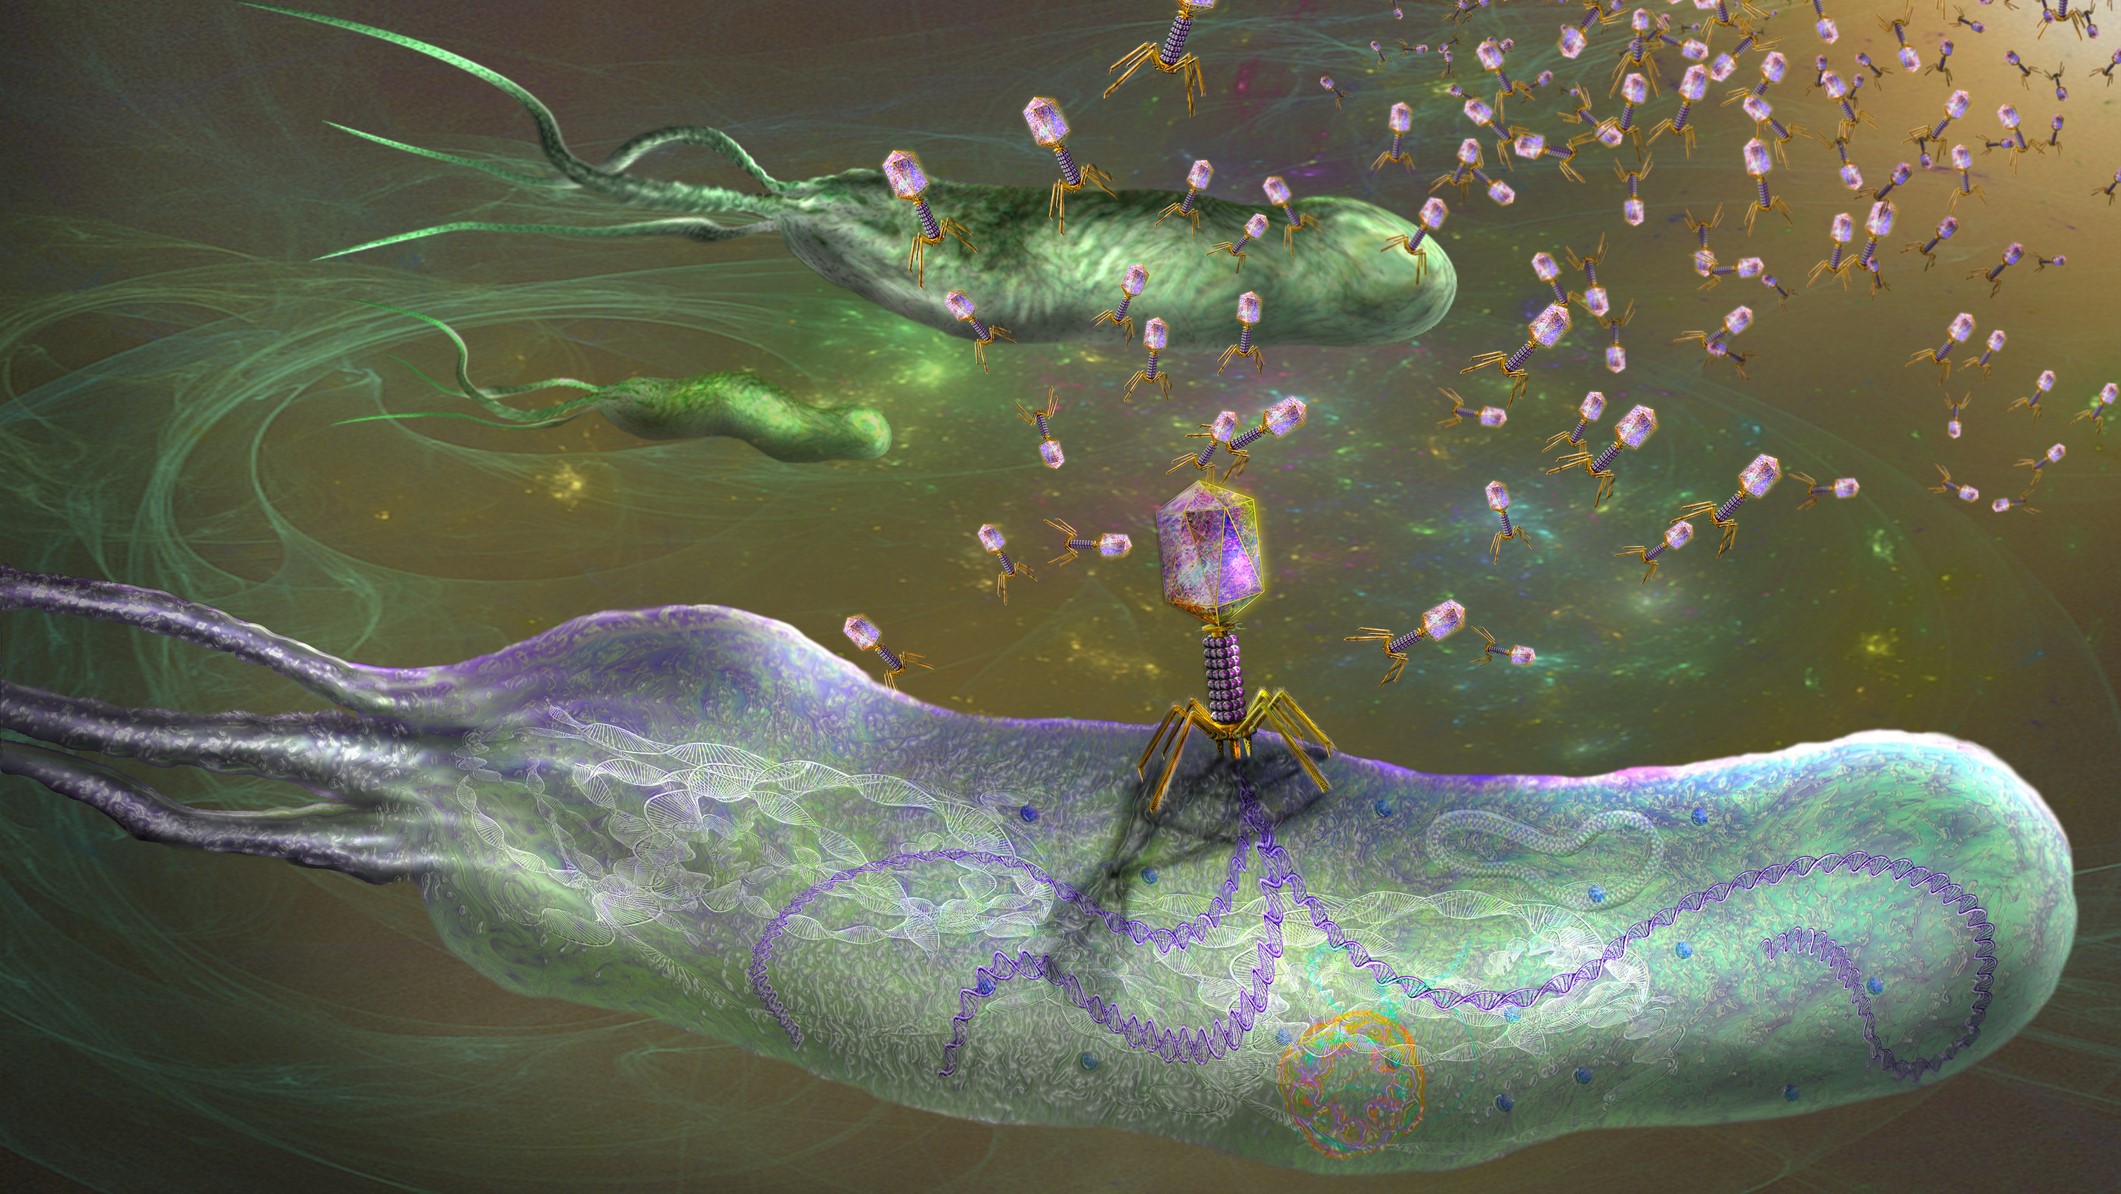 An illustration of bacteriophages infecting bacteria.